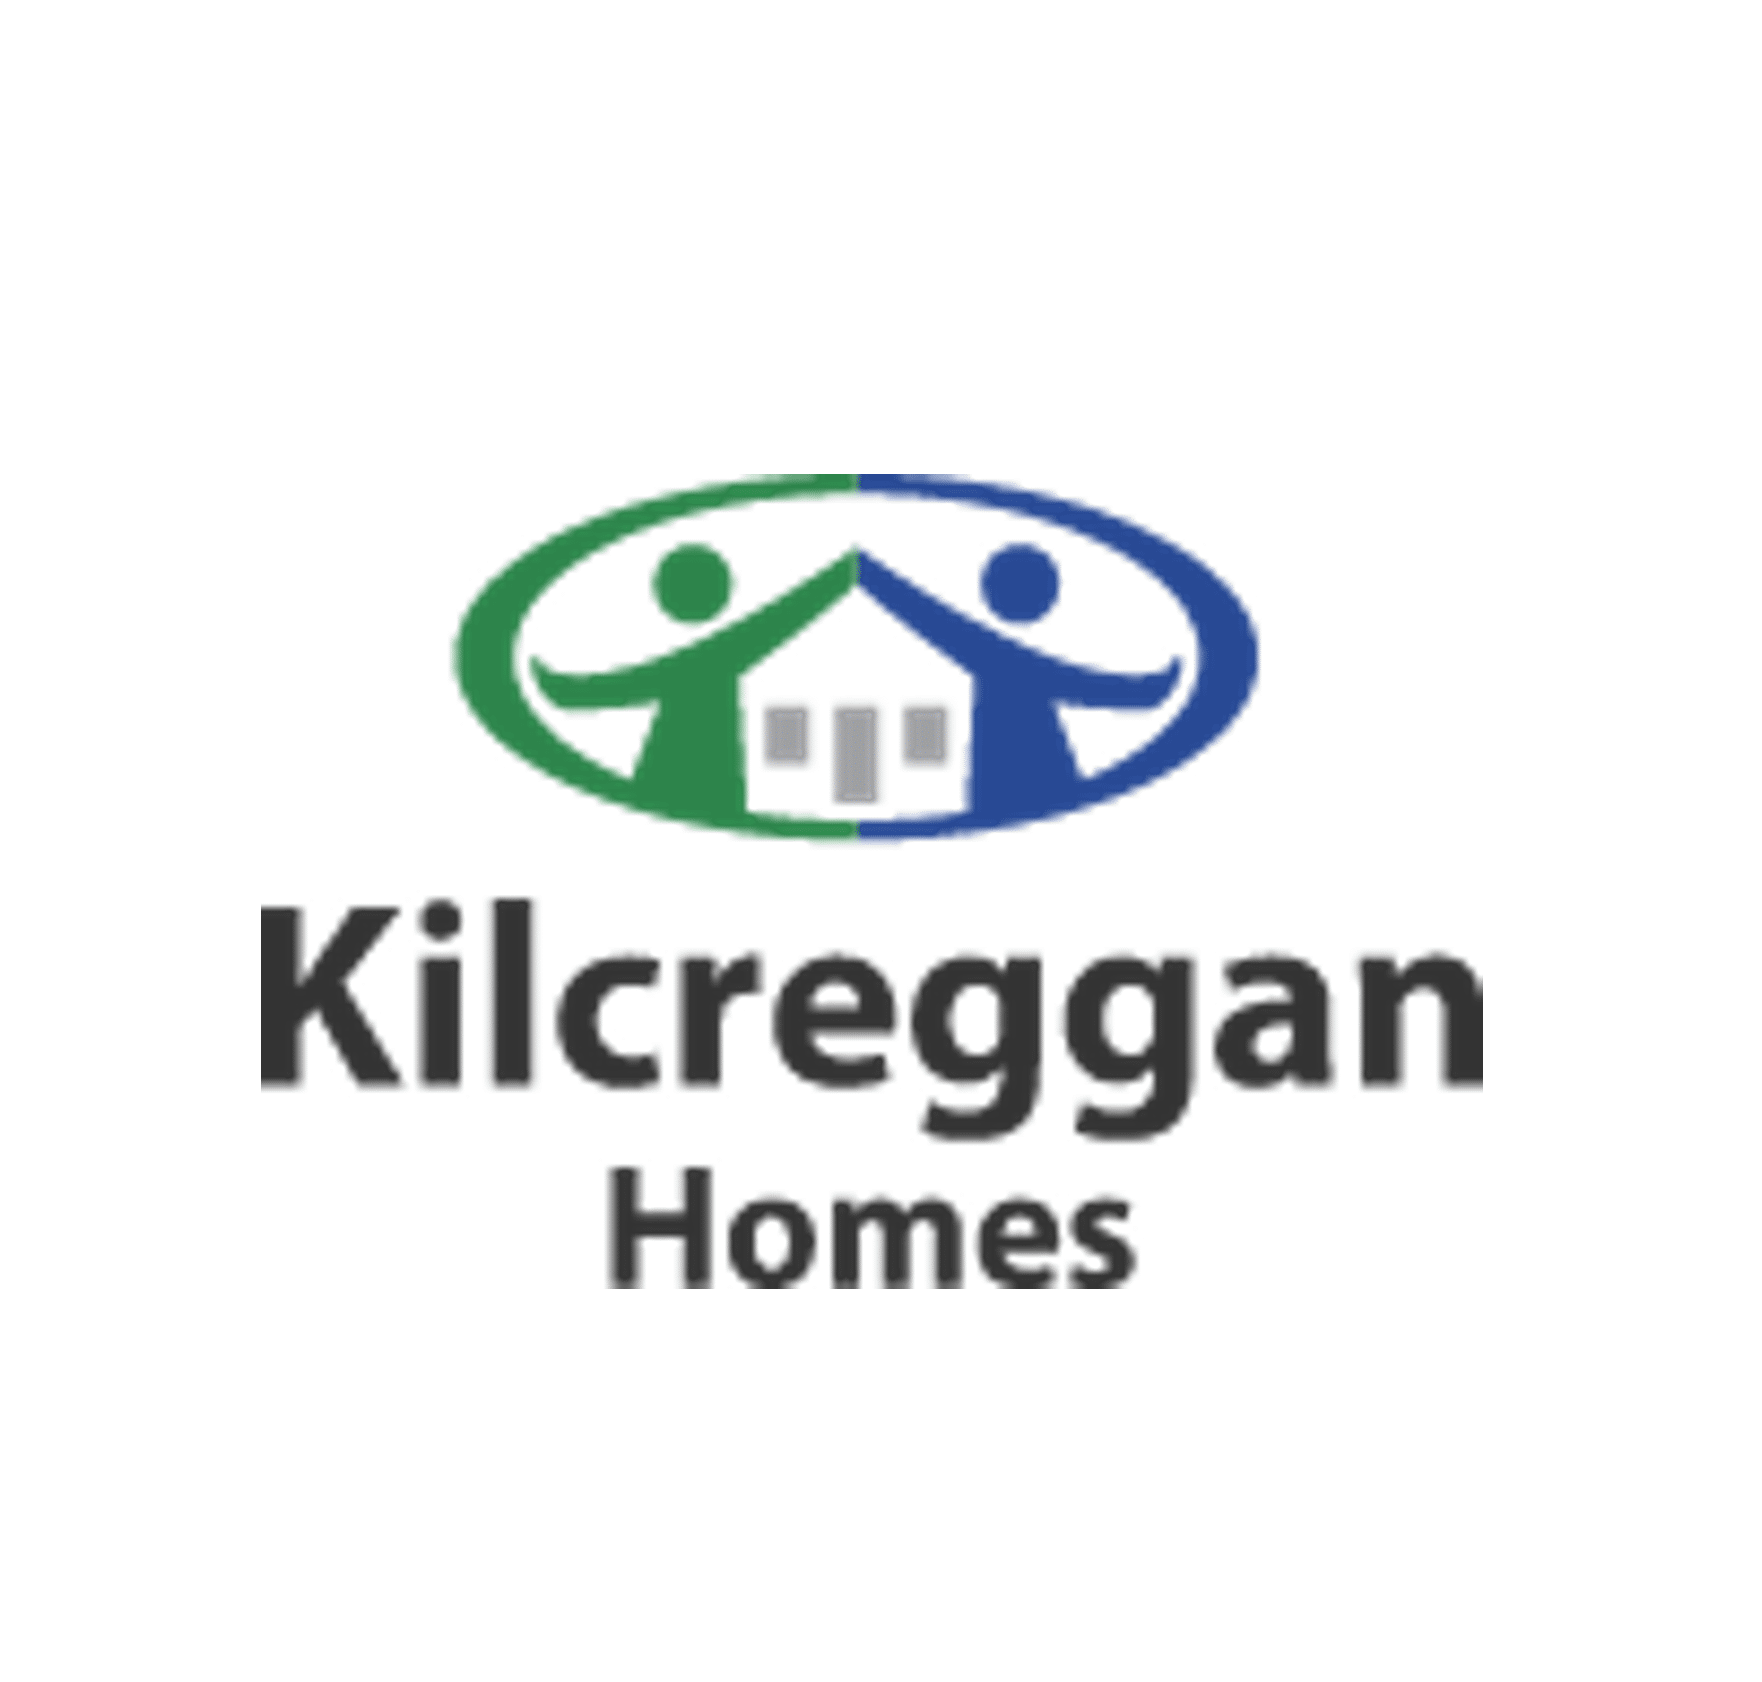 Logo of kilcreggan homes featuring a stylized house and two human figures within a circular design.